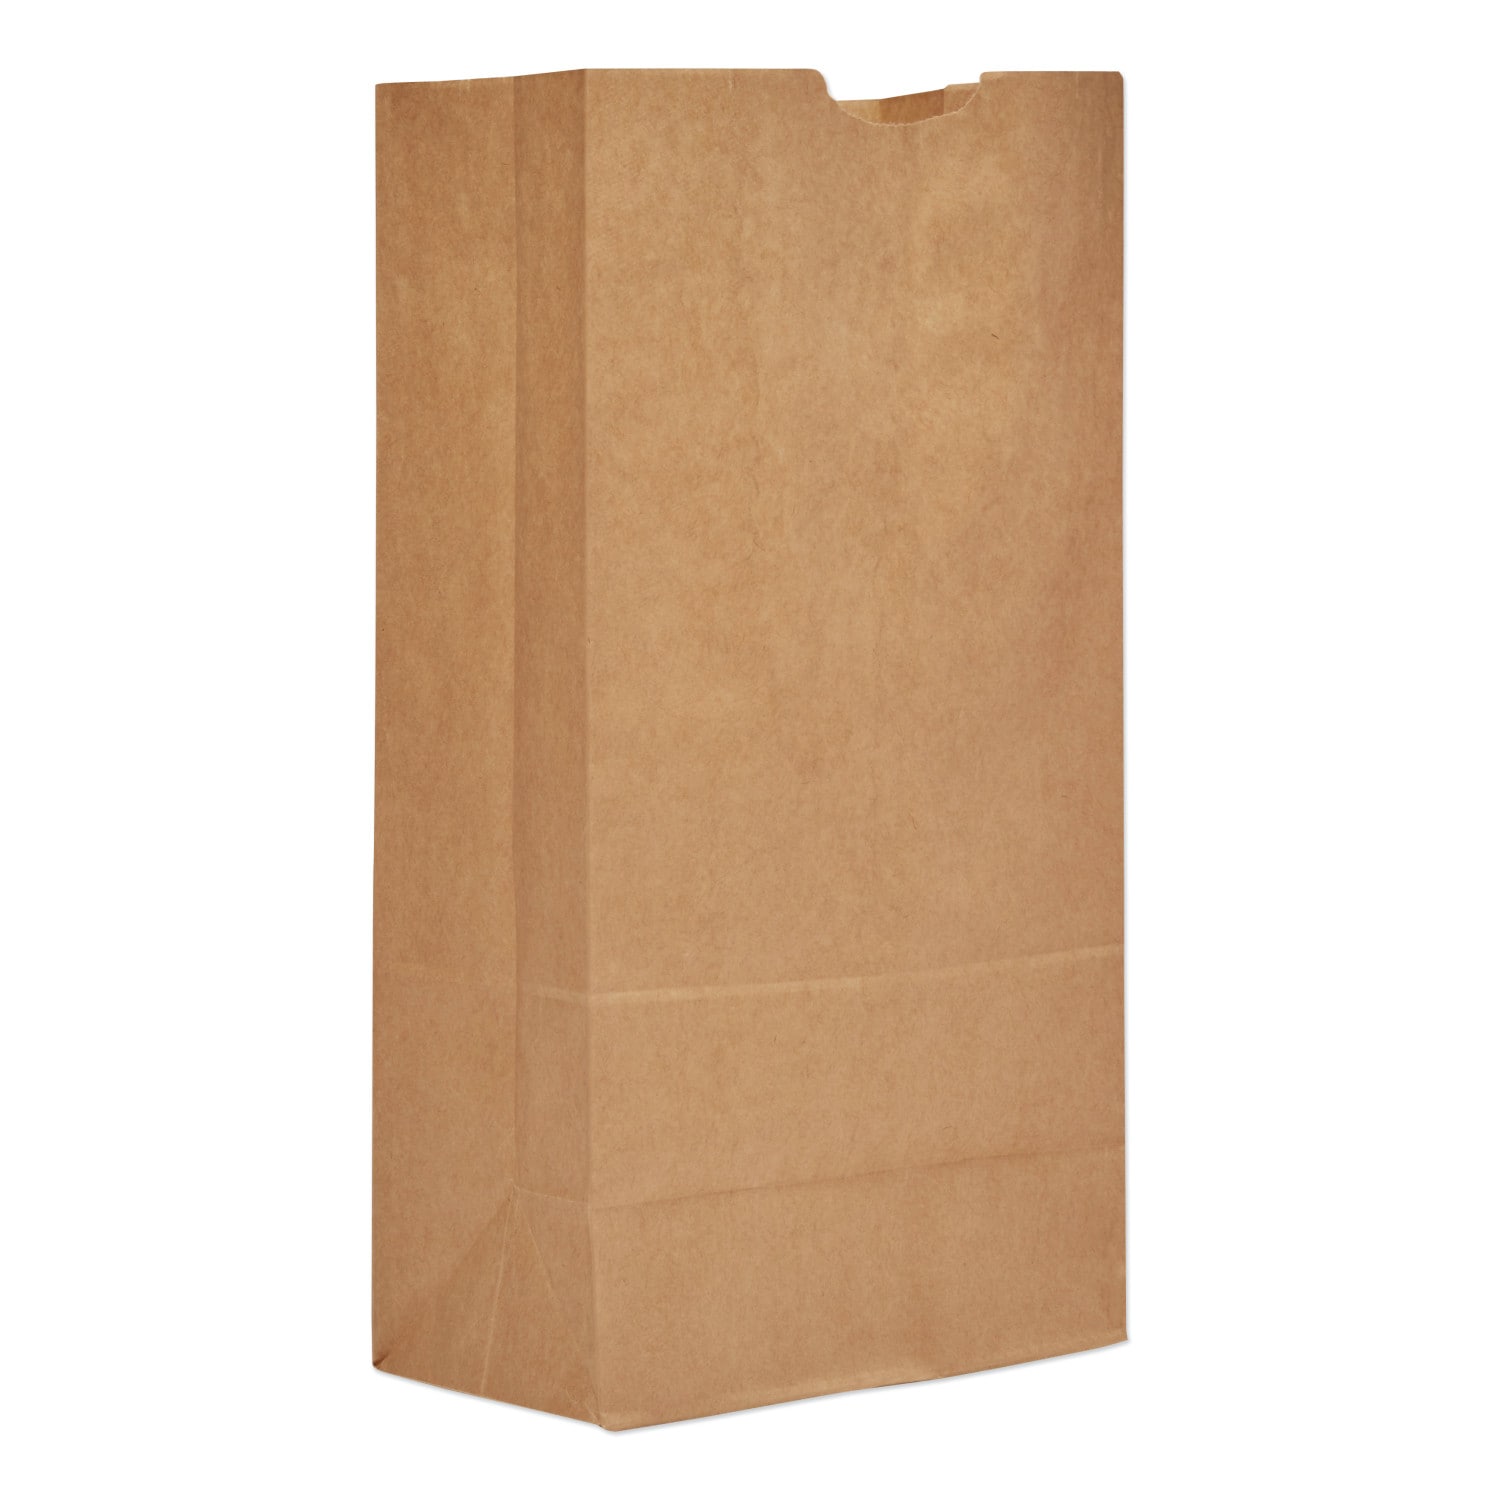 Buy Online Paper Bags From Manufacturer at Best Price